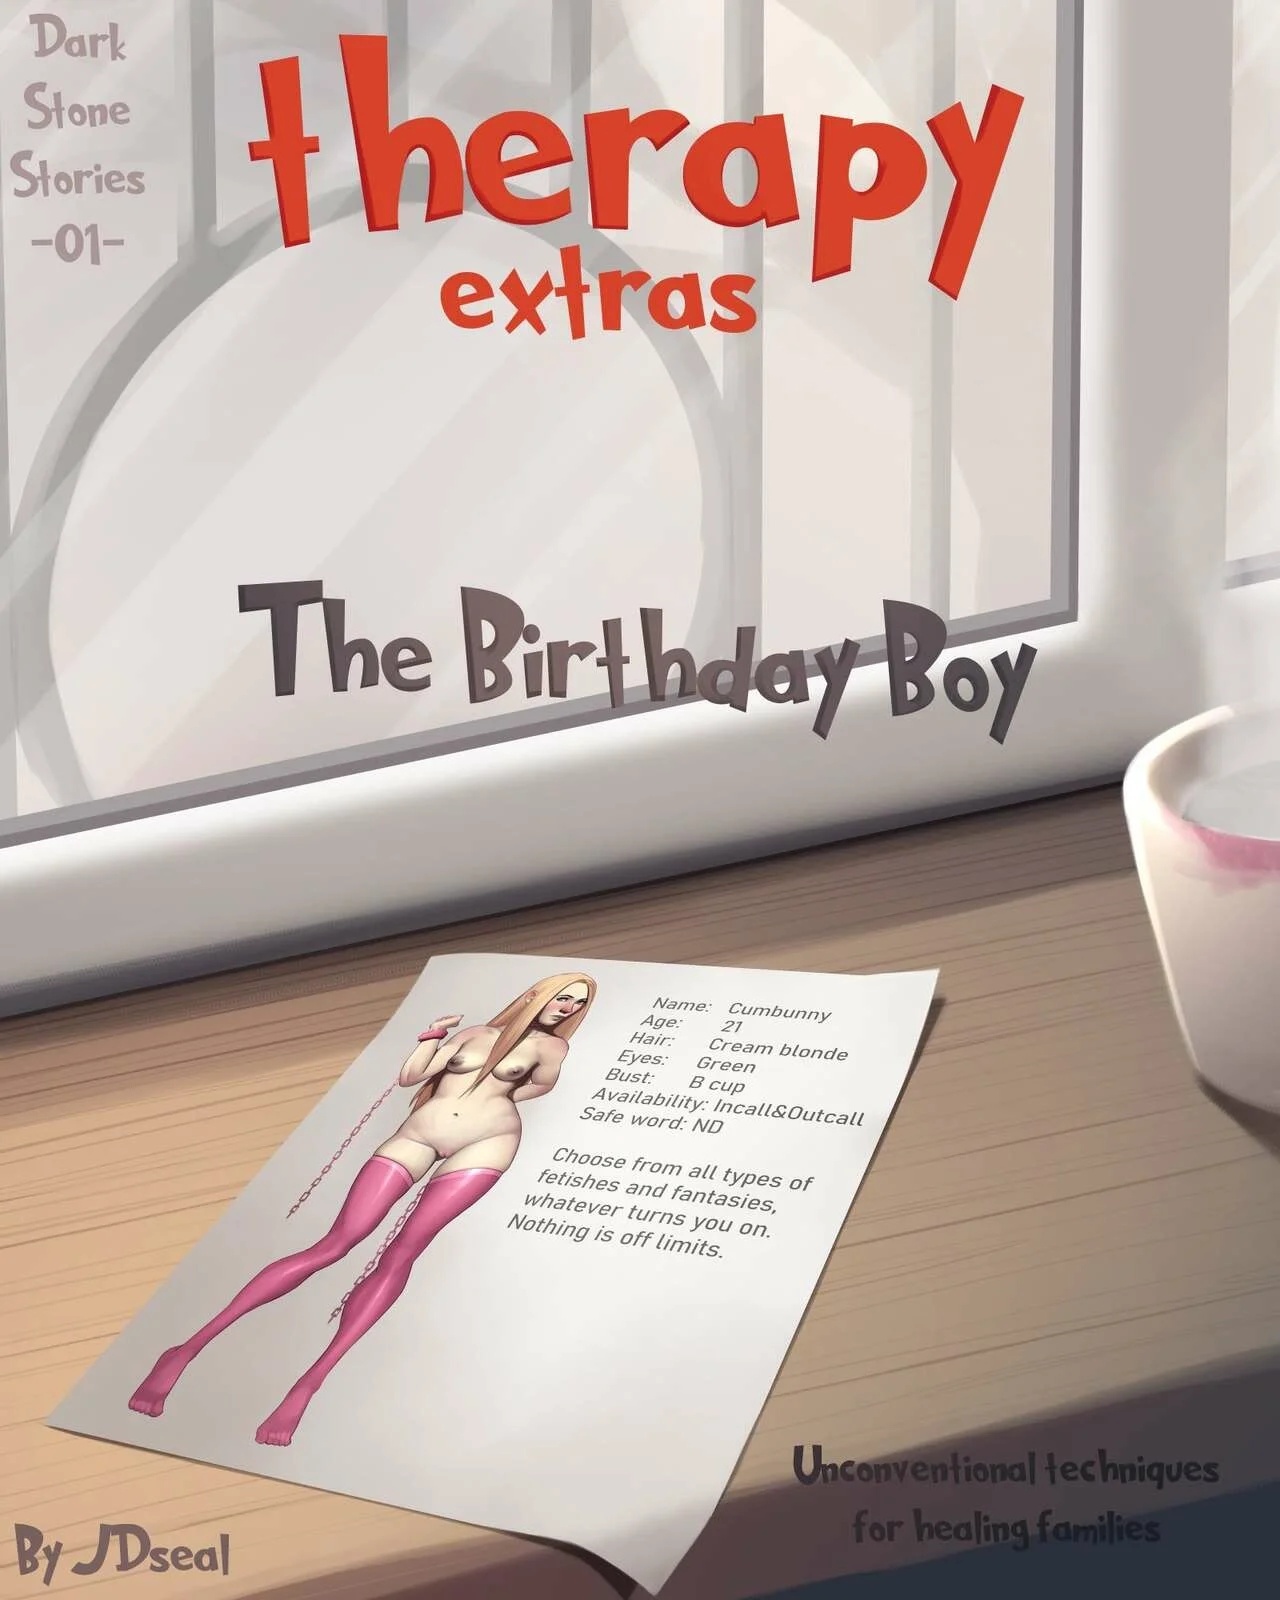 Theraphy Extras - The Birthday Boy - 0